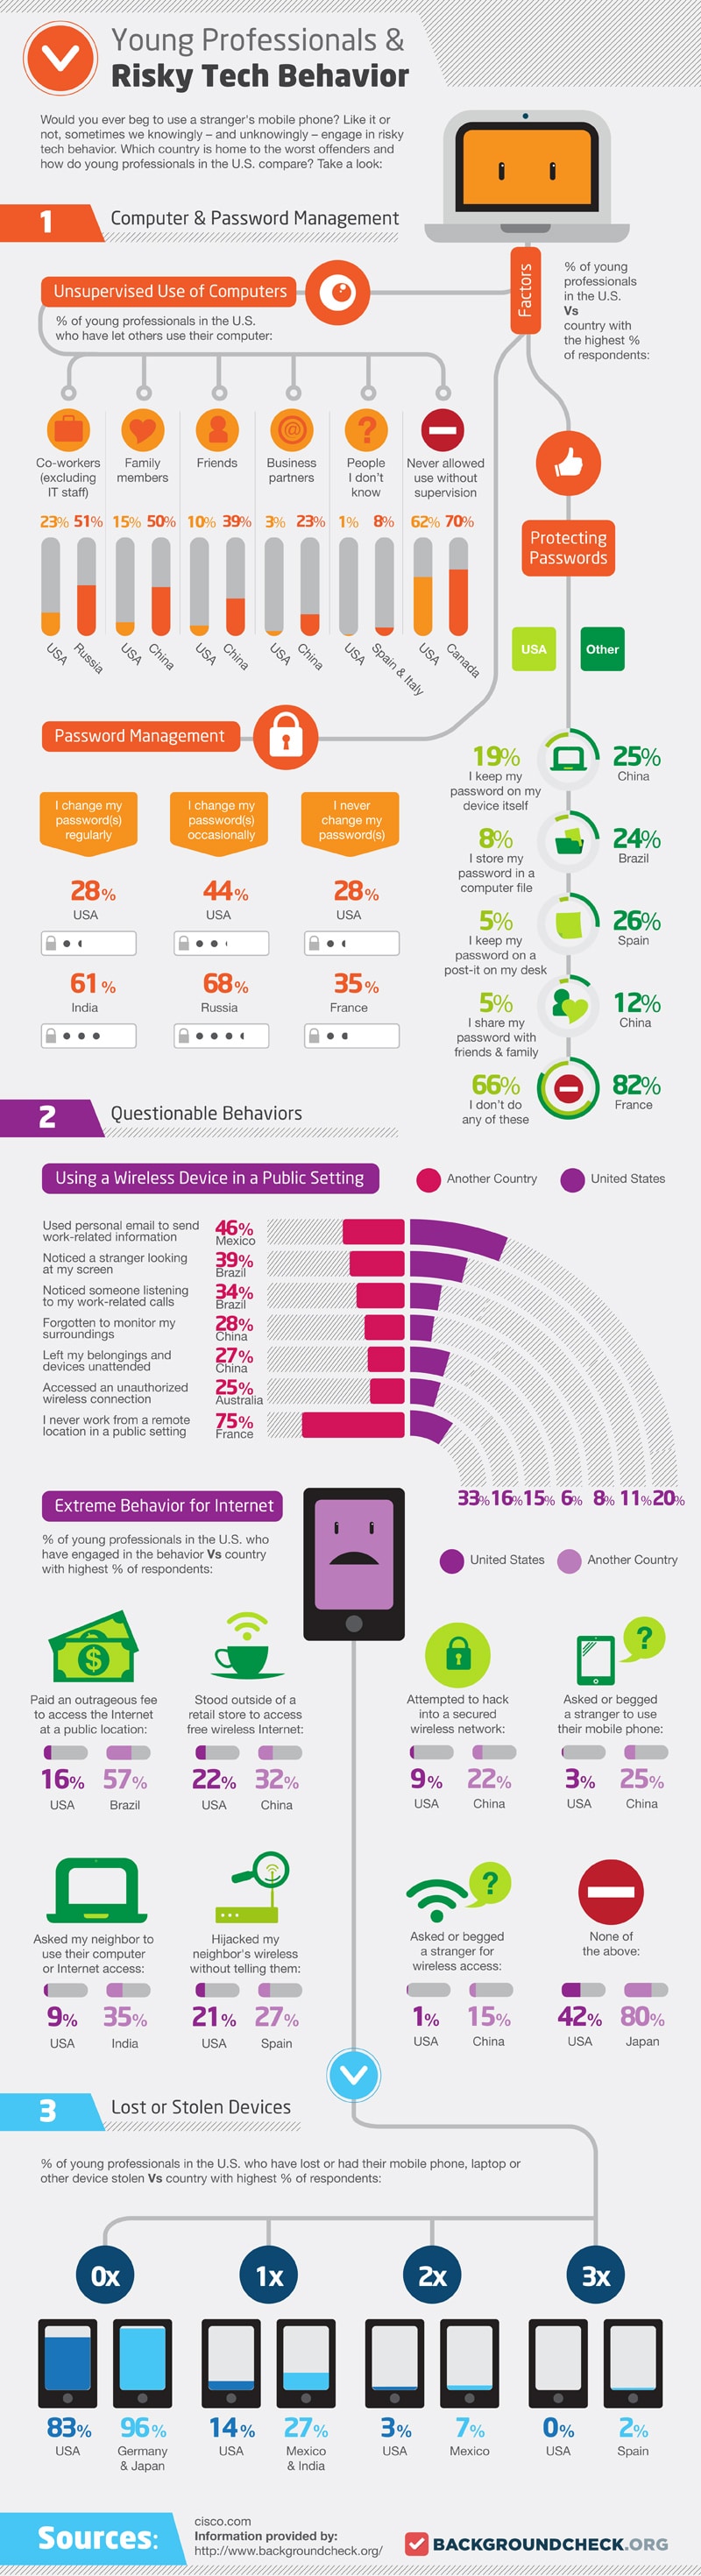 Young-Professionals-Risky-Behavior-Infographic